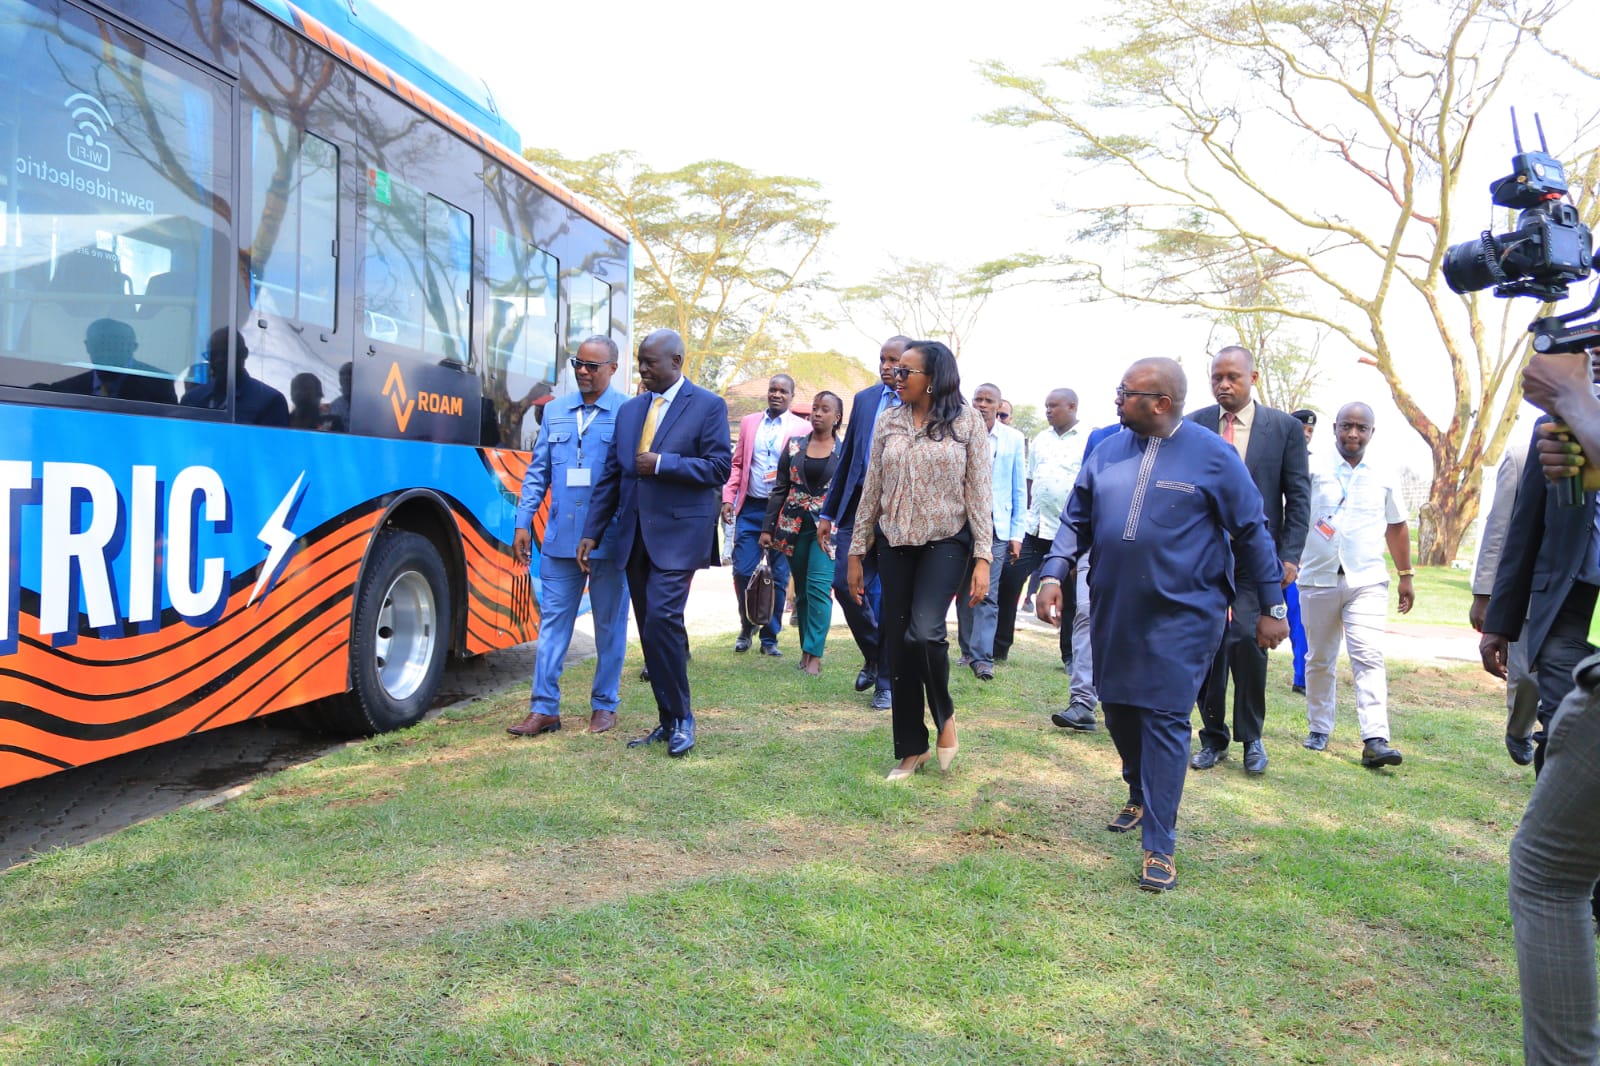 Counties to adopt green mobility in new plan